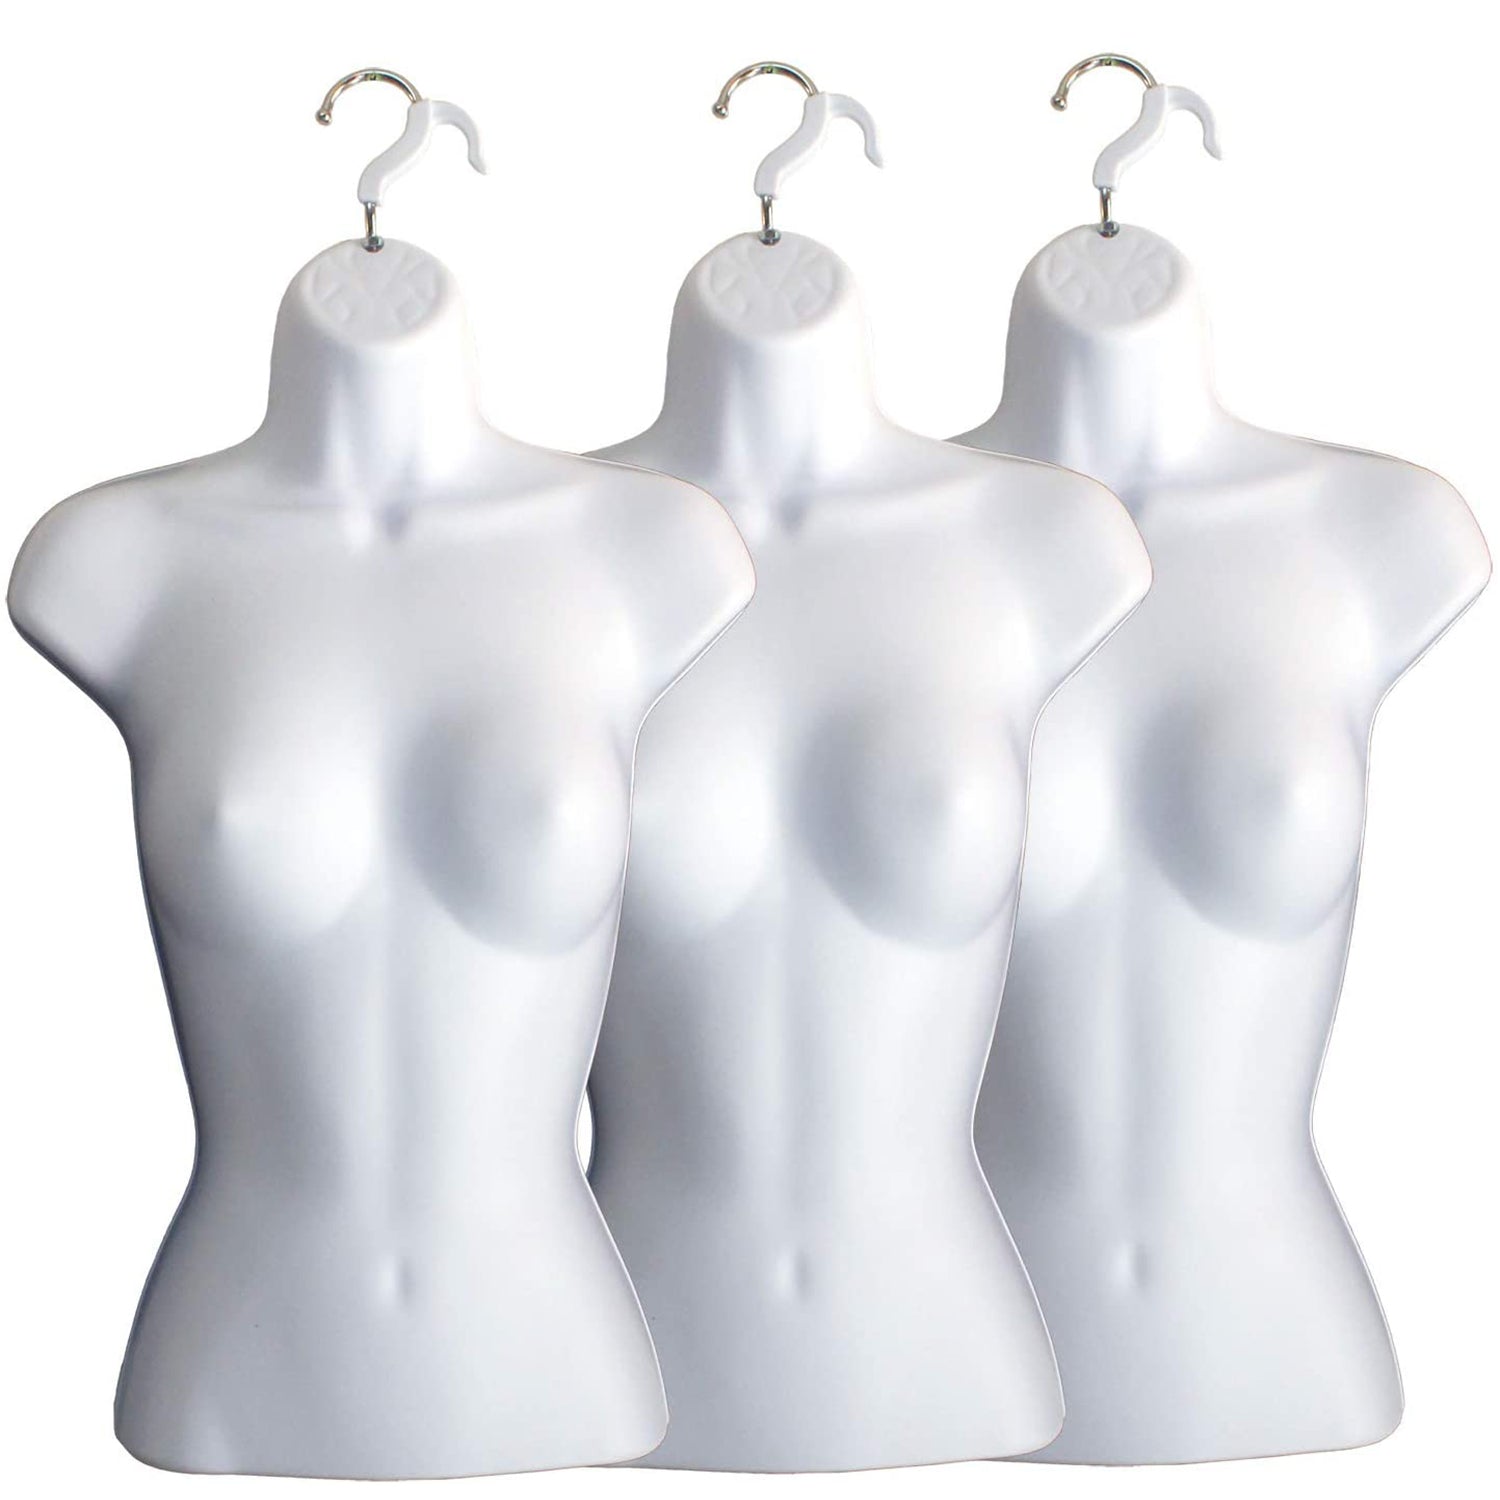 White Female Mannequin Hip Long Hollow Back Body Torso Set w/Metal Stand  with Metal Pole & Hanging Hook, S-M Size